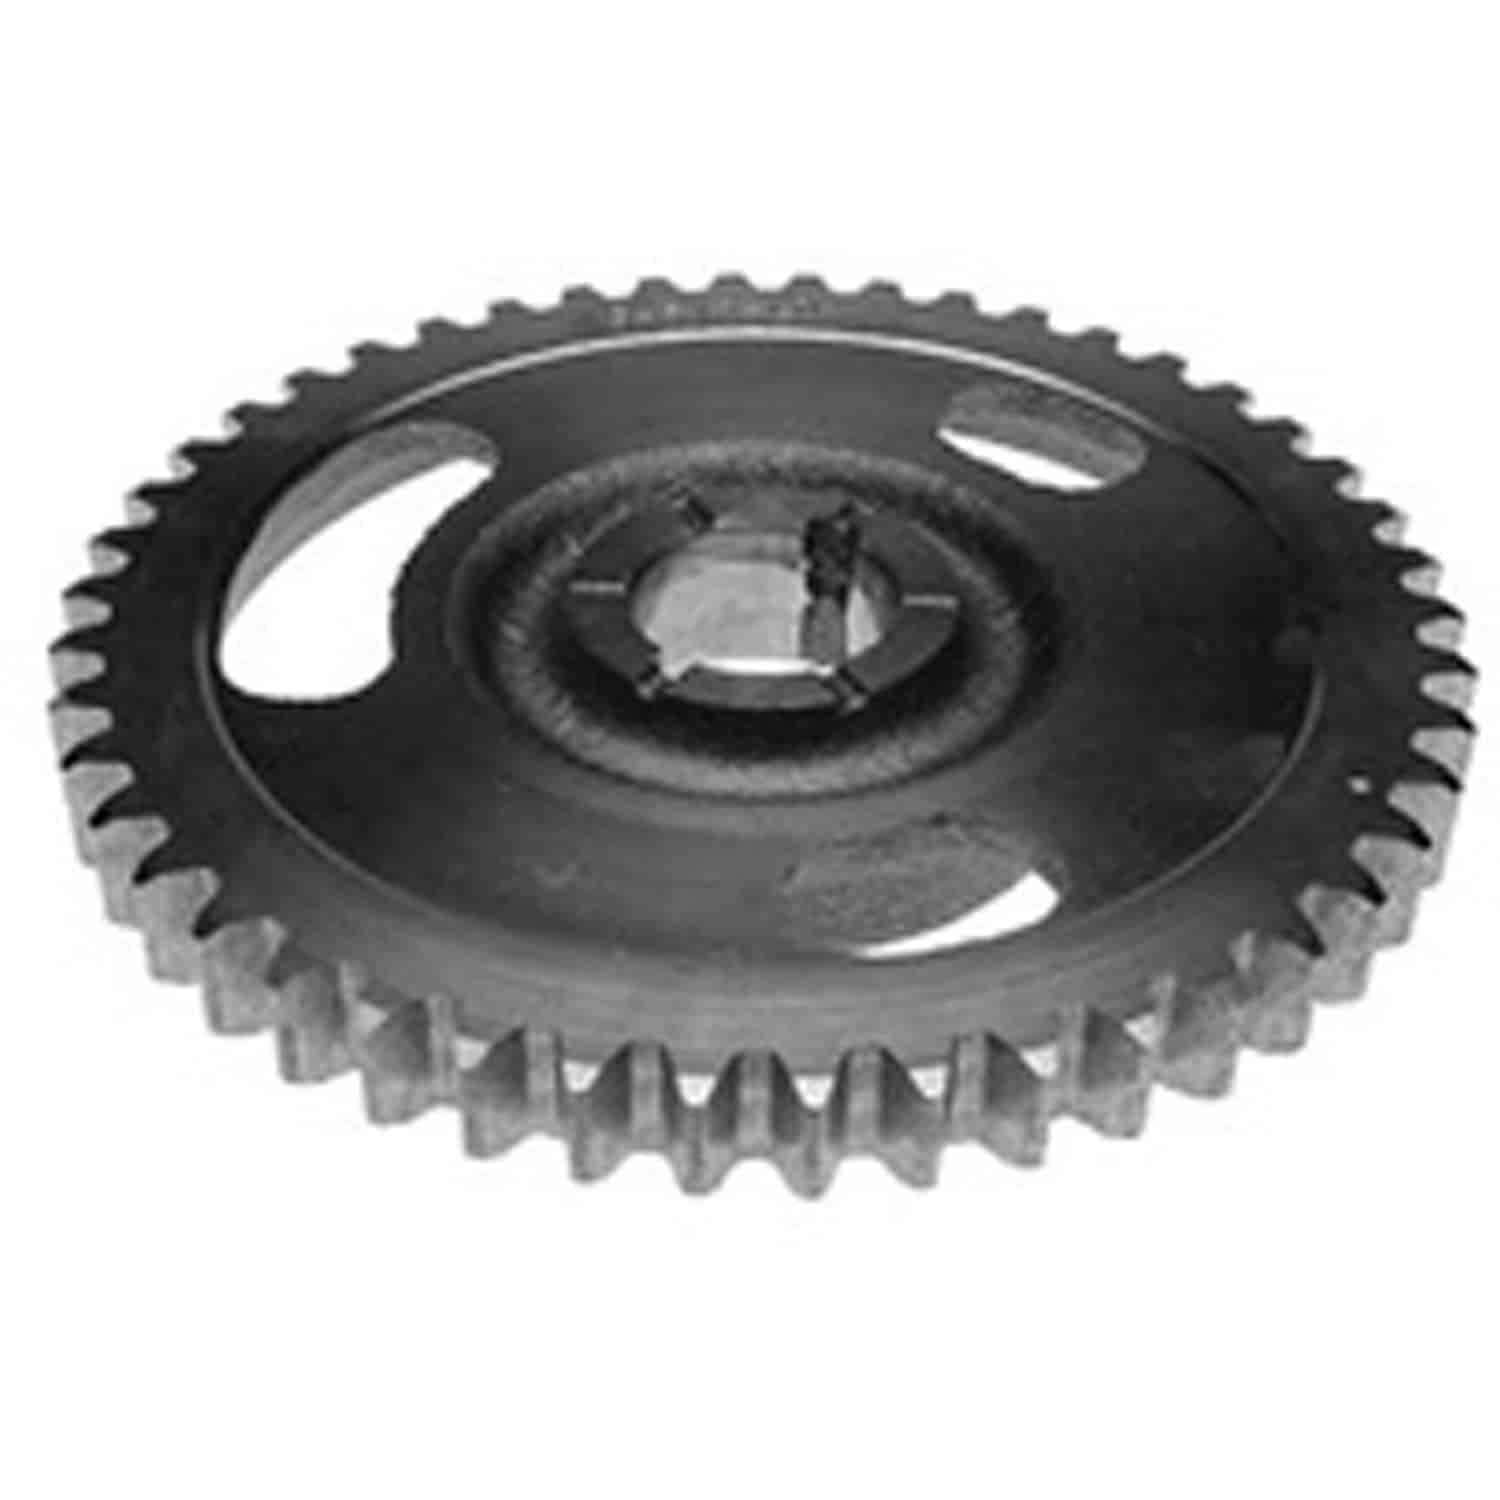 This camshaft sprocket fits the 5.0L engine in 79-81 Jeep CJs and the 5.9L or 6.6L engines used in 7